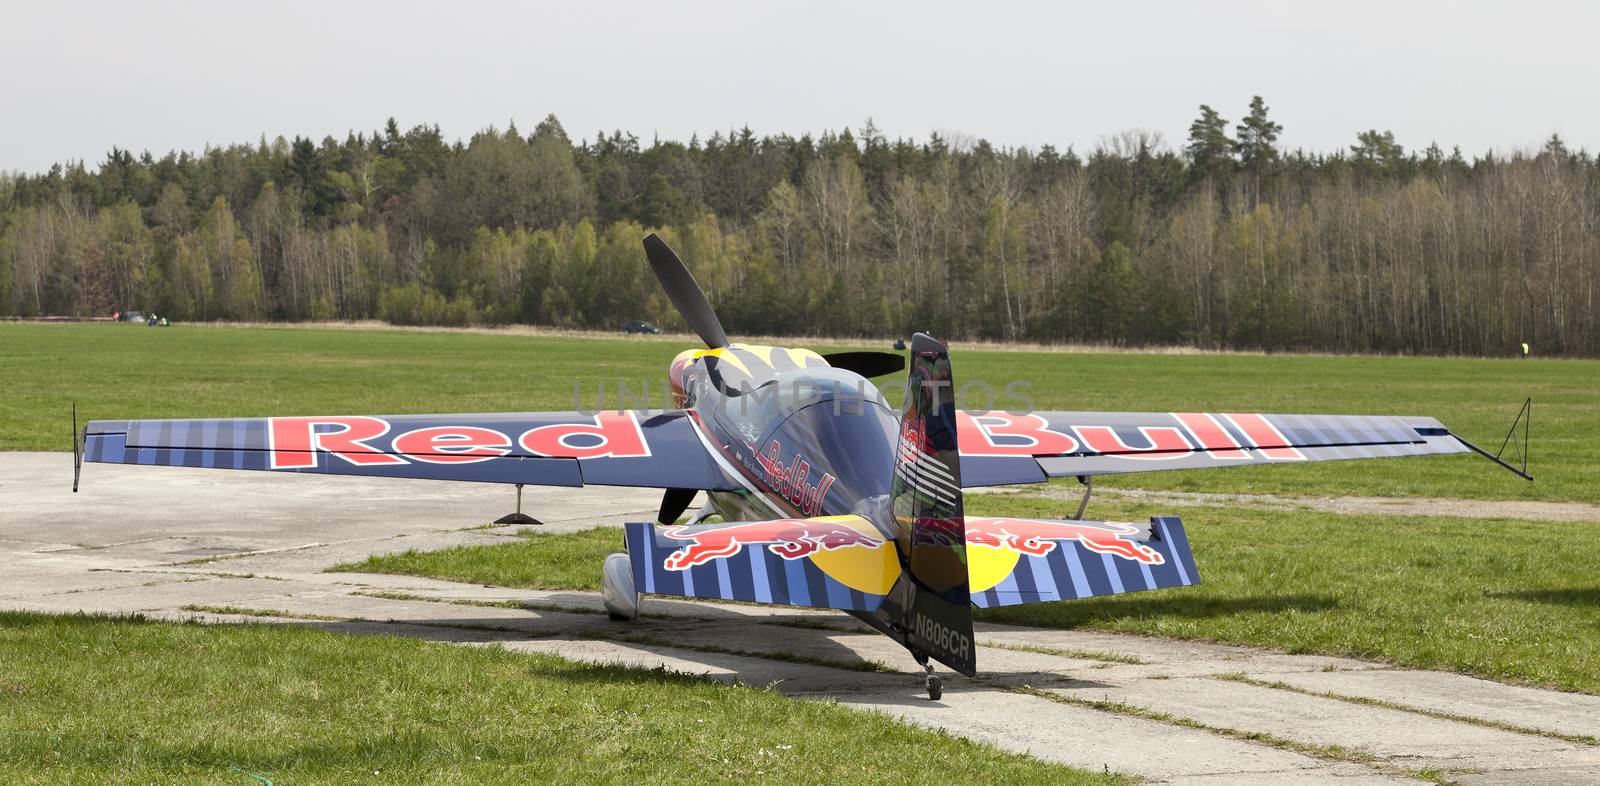 Plasy, Czech Republic - April 27, 2013: Peter Besenyei from Hungary on the Airshow "The Day on Air". His aircraft is painted in the colors of Red Bull energy drink for sponsorship reasons